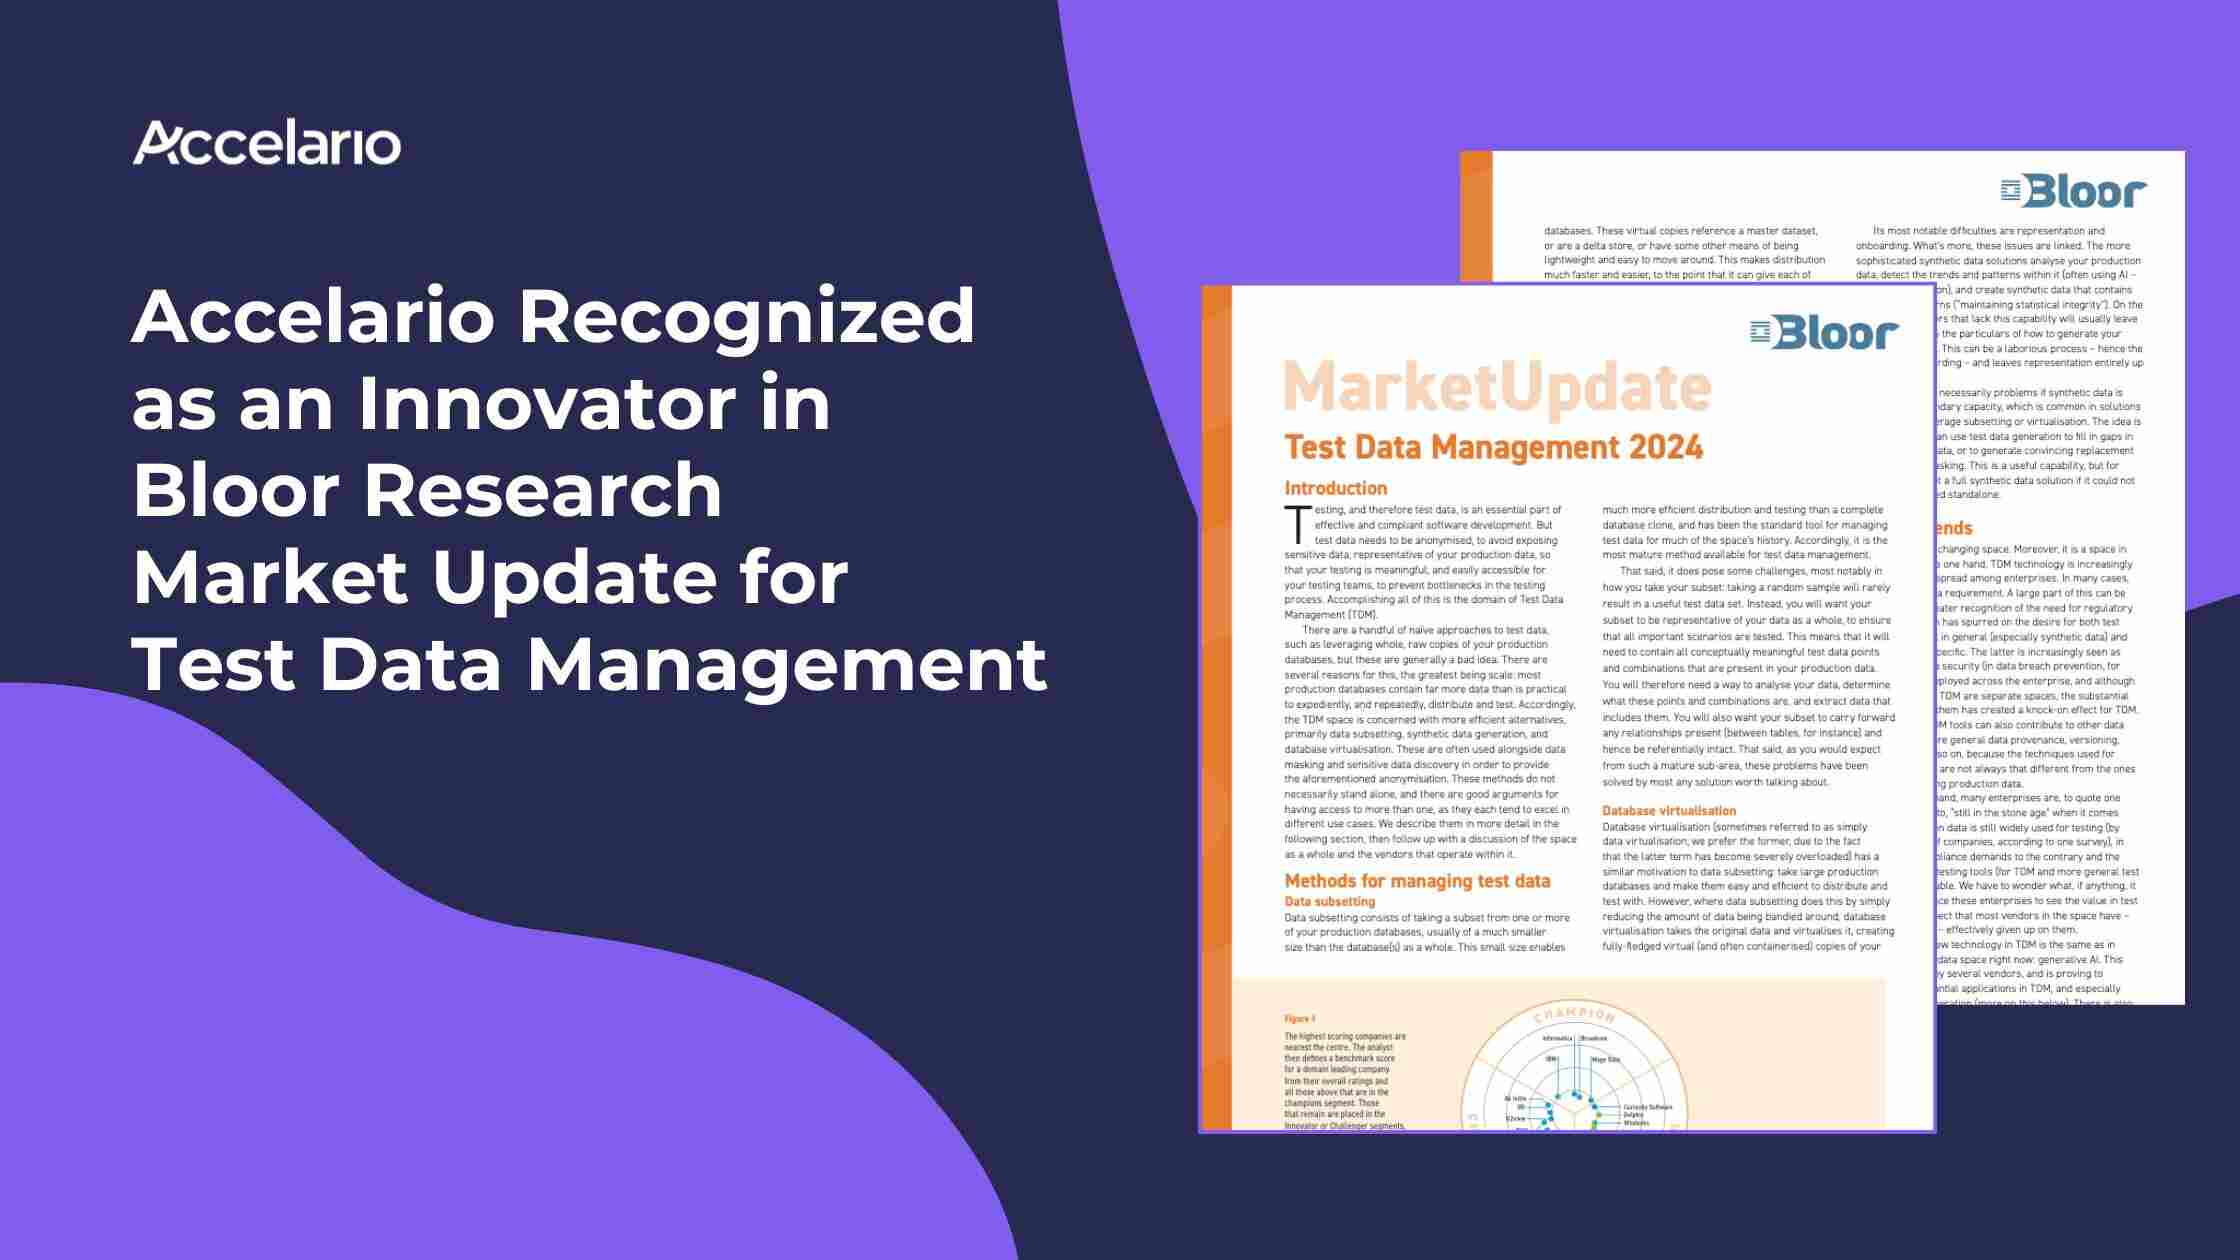 Accelario Recognized as an Innovator in Bloor Research Market Update for Test Data Management